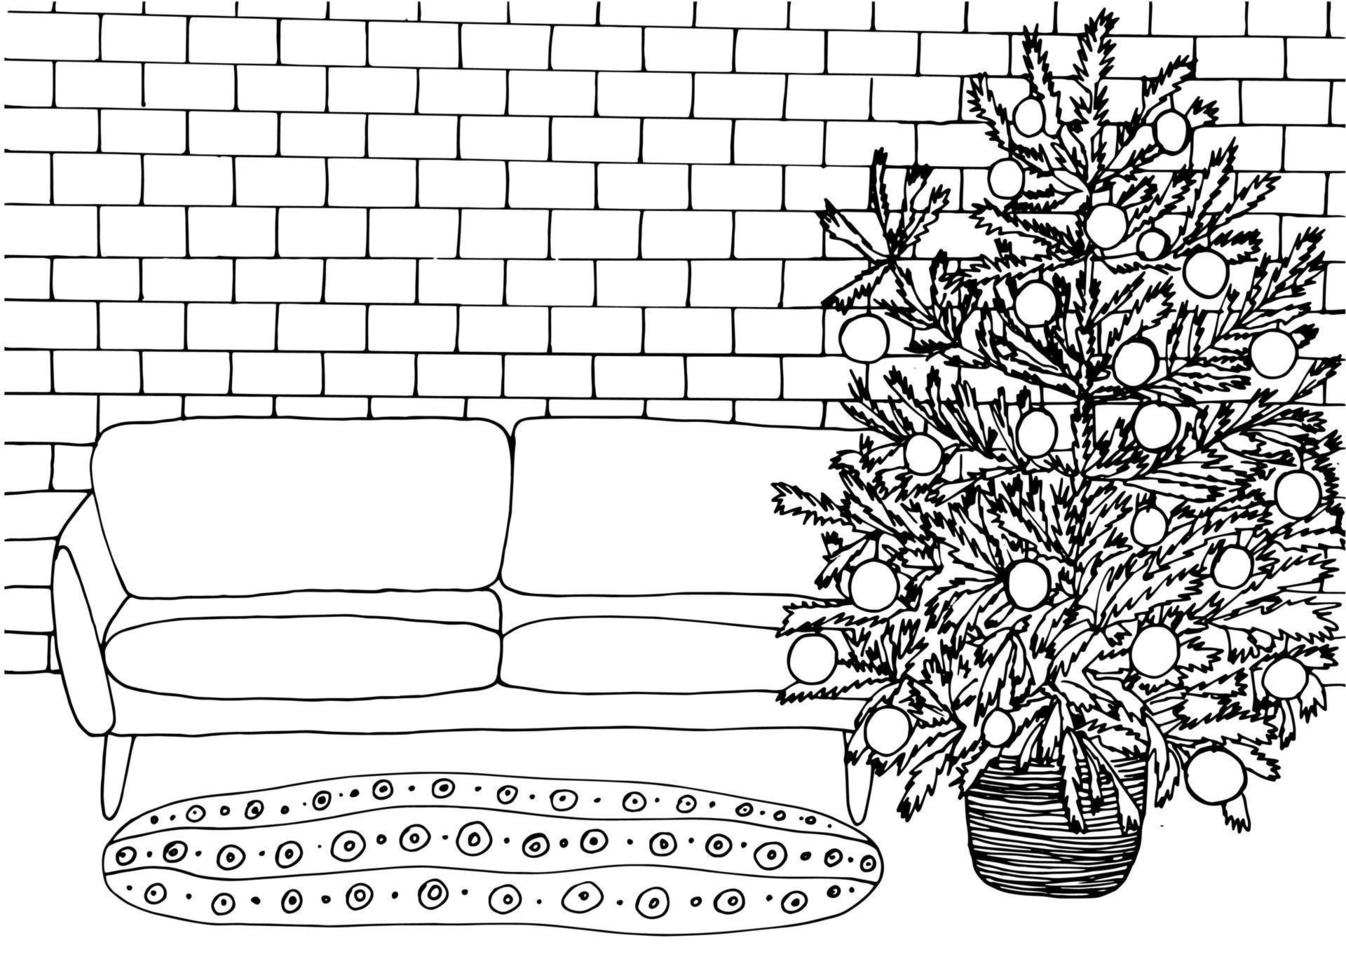 Christmas living room coloring page. Cozy home interior outline vector illustration. Big Christmas tree, sofa, brick wall, rug. Cute anti stress coloring book.